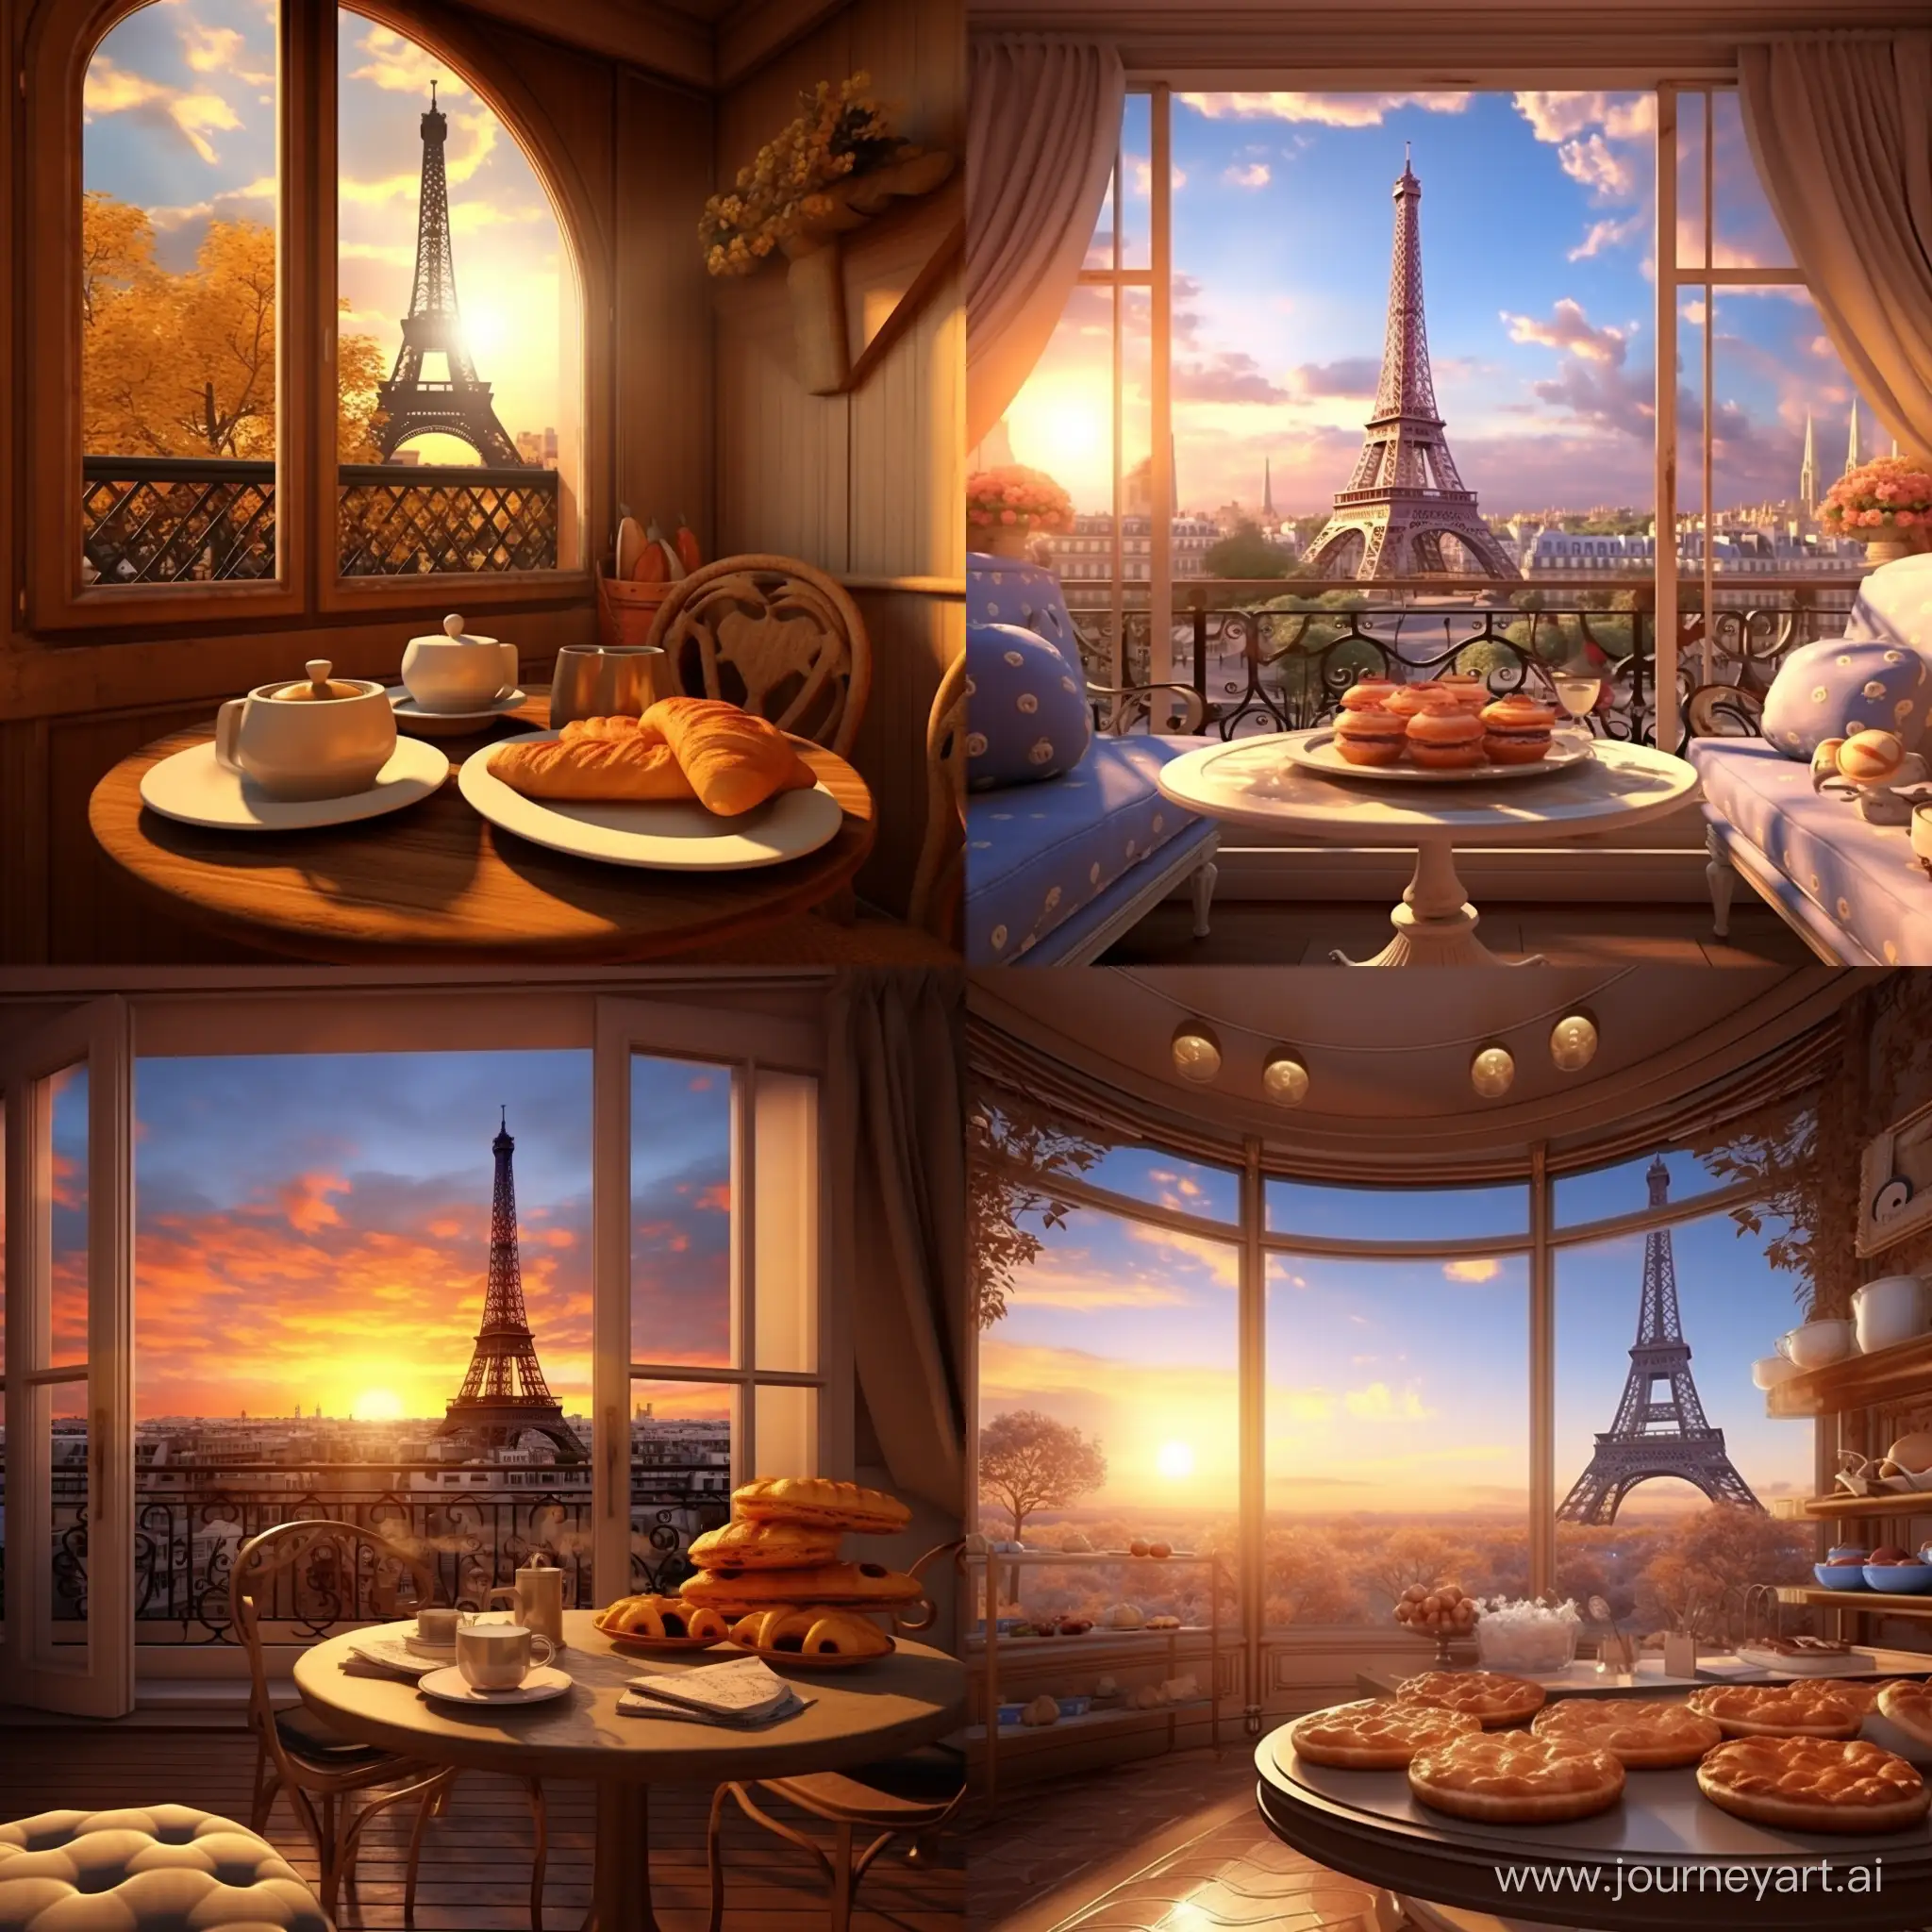 Charming-Parisian-Breakfast-Scene-with-Croissants-and-Eiffel-Tower-View